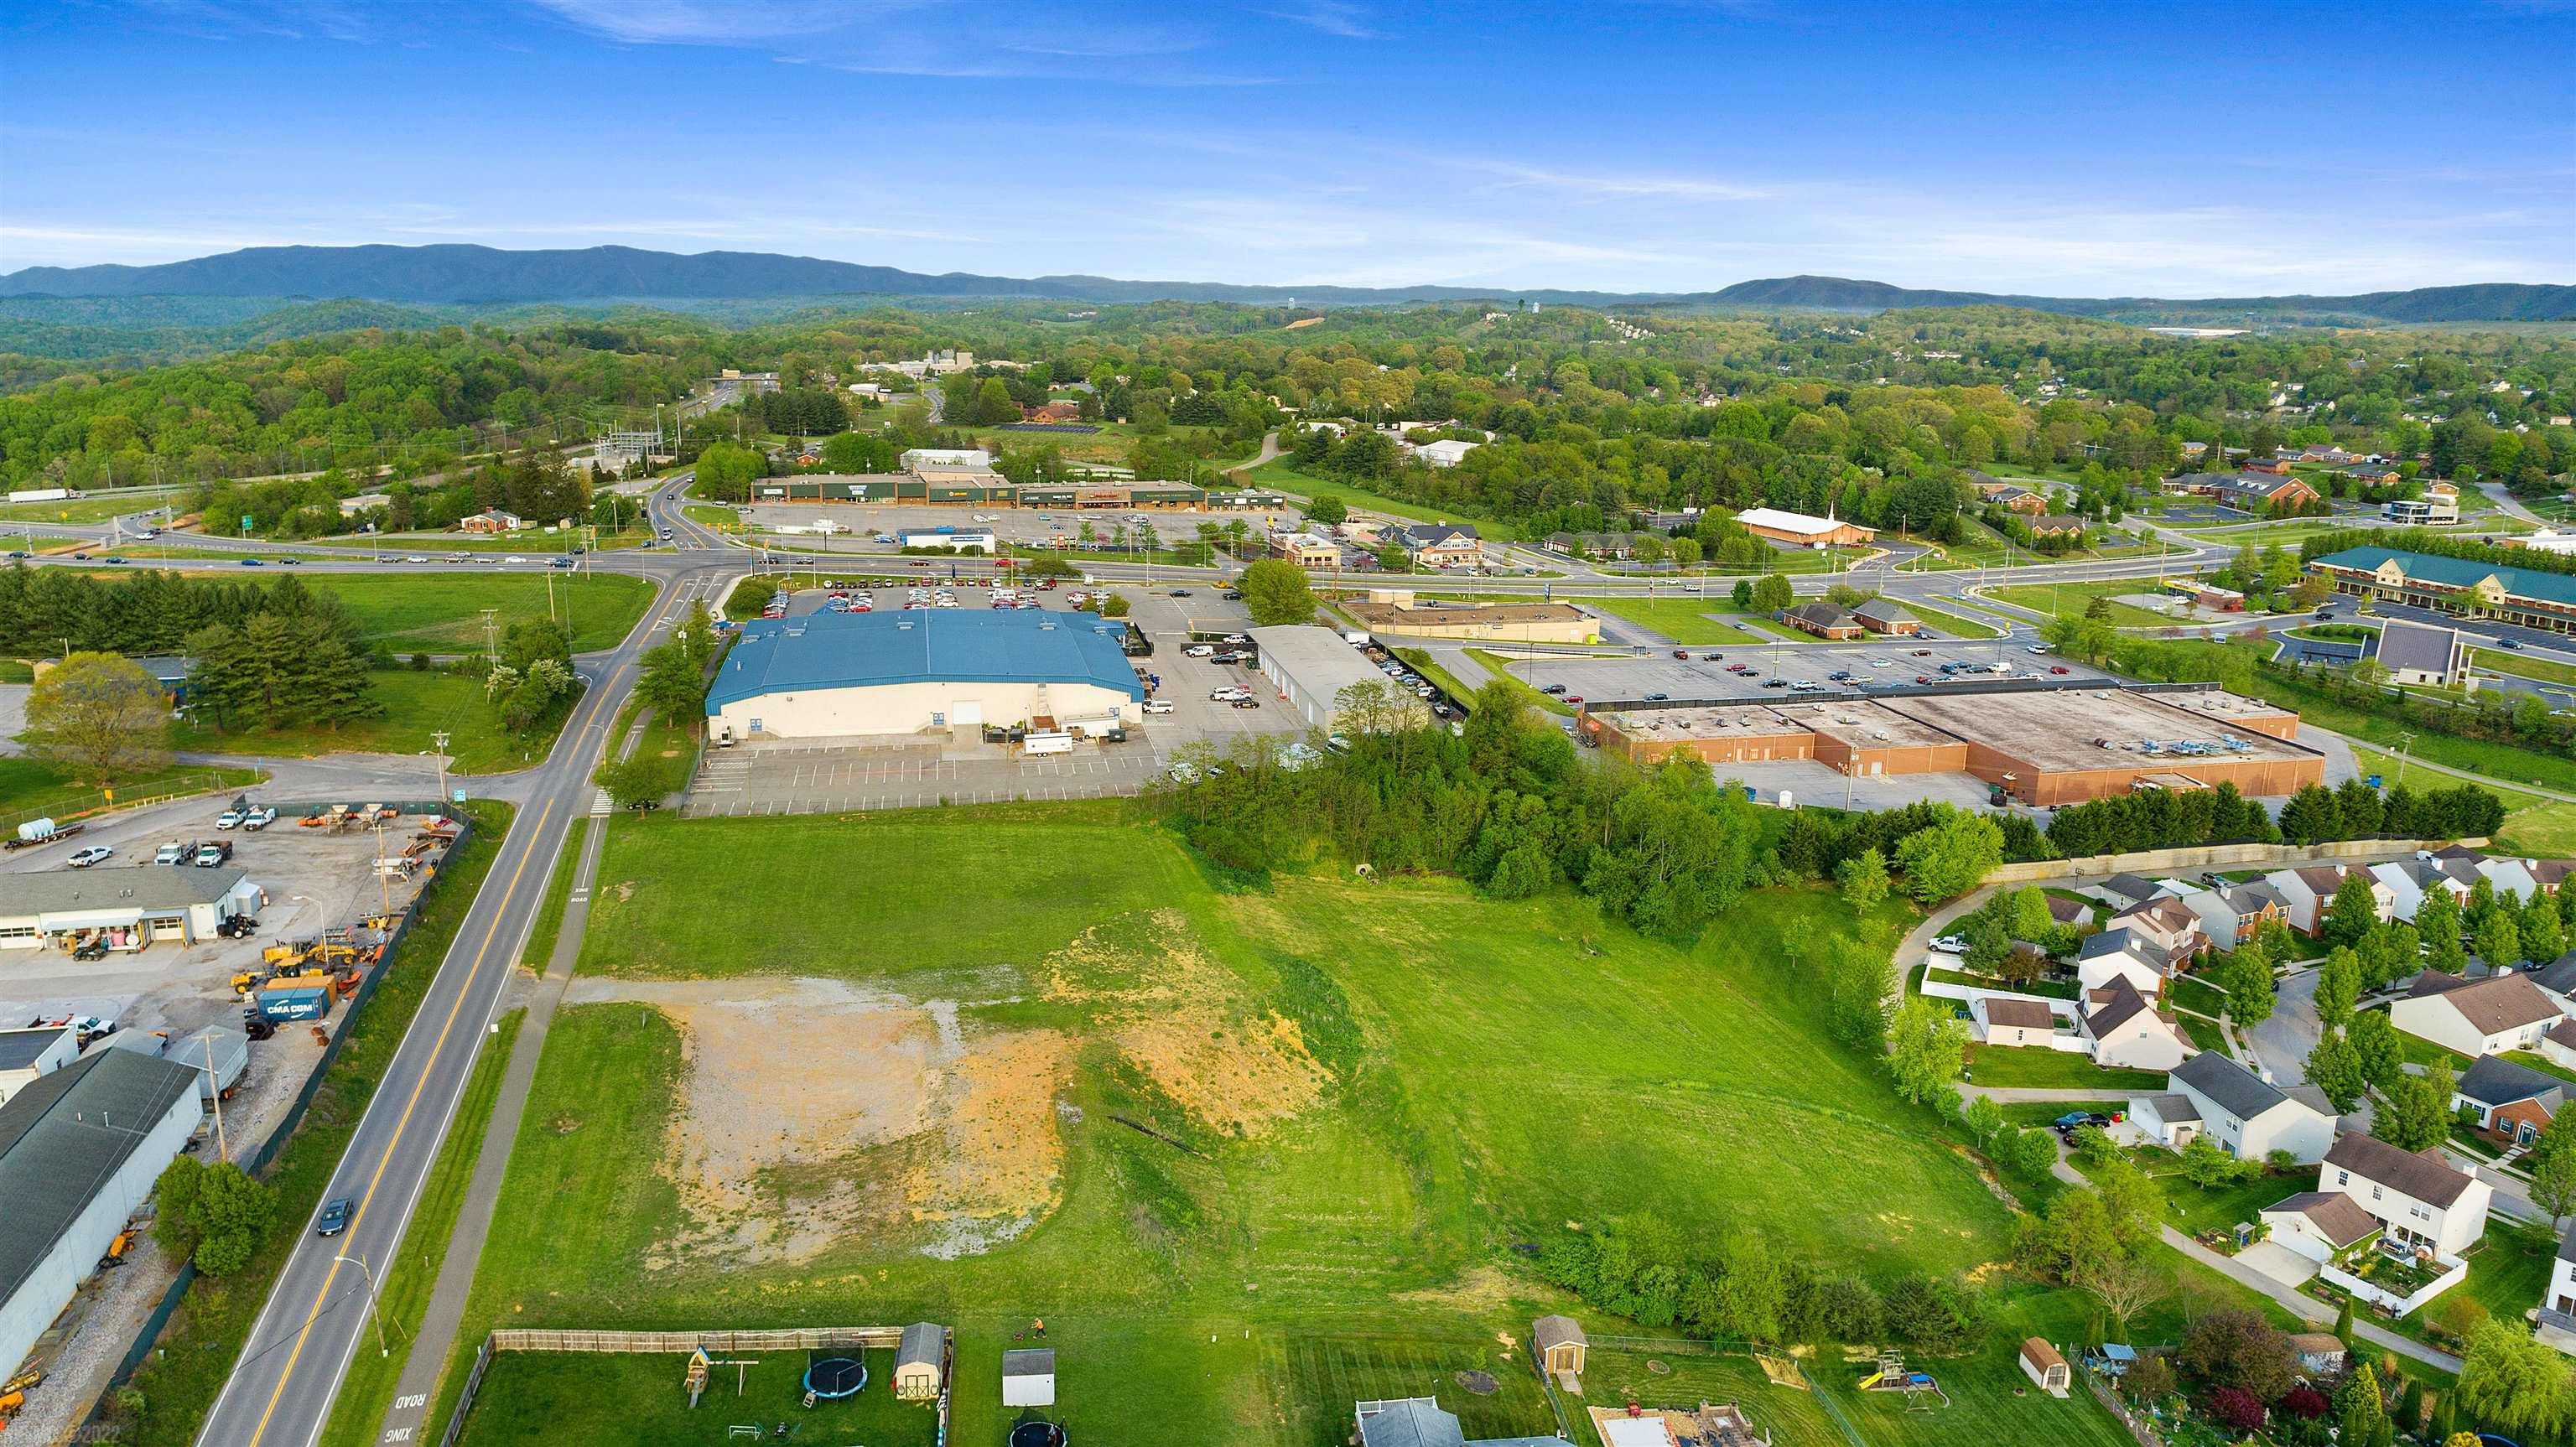 This 2.5+ acre Commercial lot is located in Christiansburg on Cambria Street, directly behind the Christiansburg Recreation Center with direct access to the Huckleberry Trail.  Great location with high visibility and high traffic count.  Easy access from 460 Business and I-81.  This property is zoned B3/General Business with many uses available. (Church, restaurant, retail, repair/service facility, storage buildings, athletic facility, professional offices, etc.) Additional 2.3 acre tract also available direct beside this lot.  MLS#